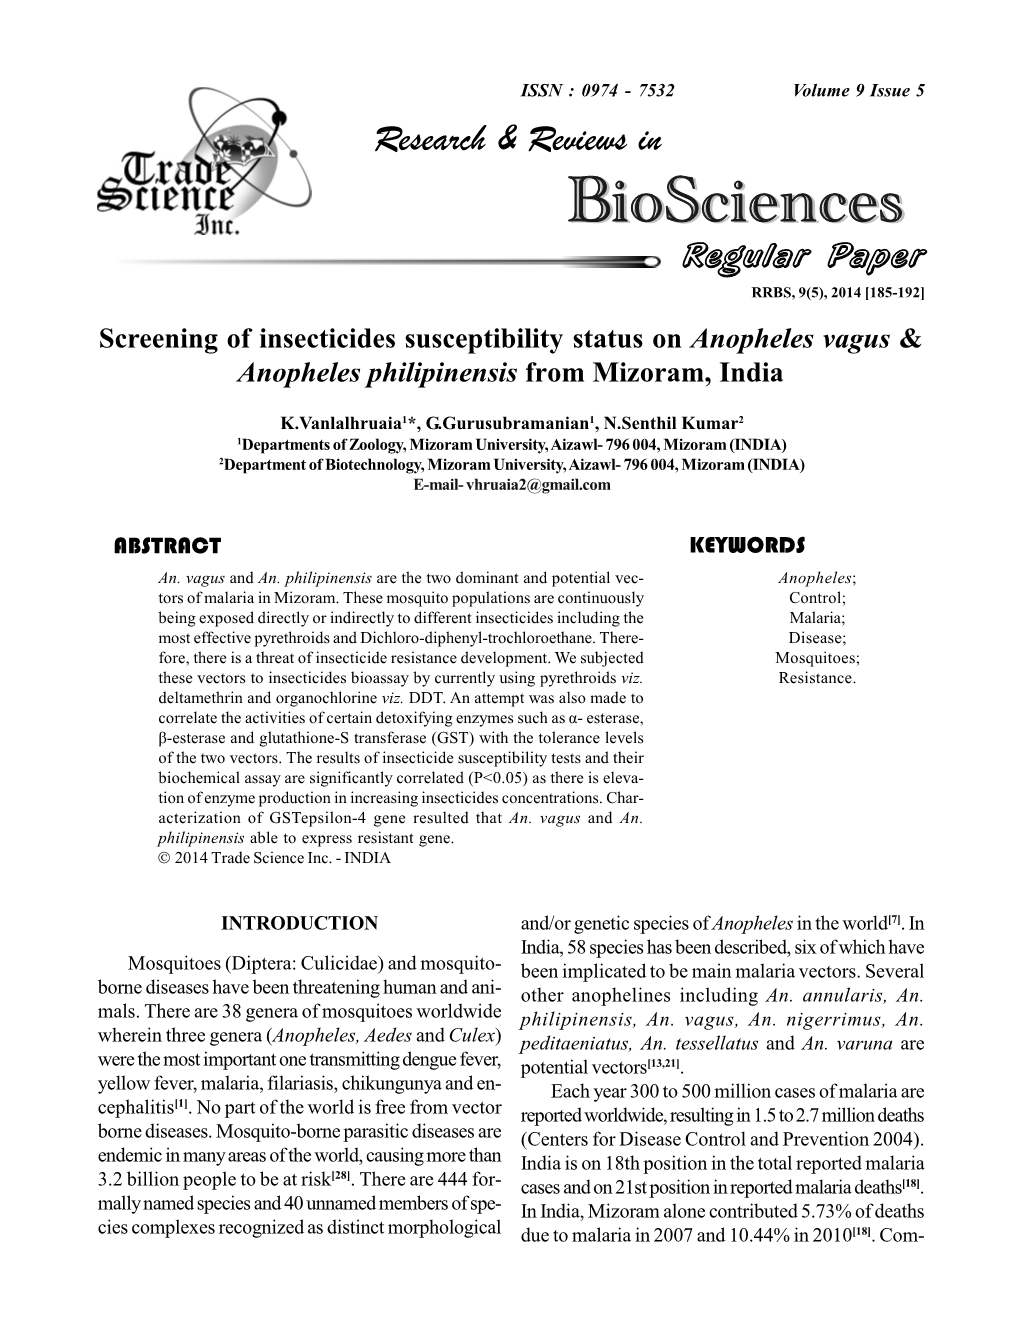 Screening of Insecticides Susceptibility Status on Anopheles Vagus & Anopheles Philipinensis from Mizoram, India